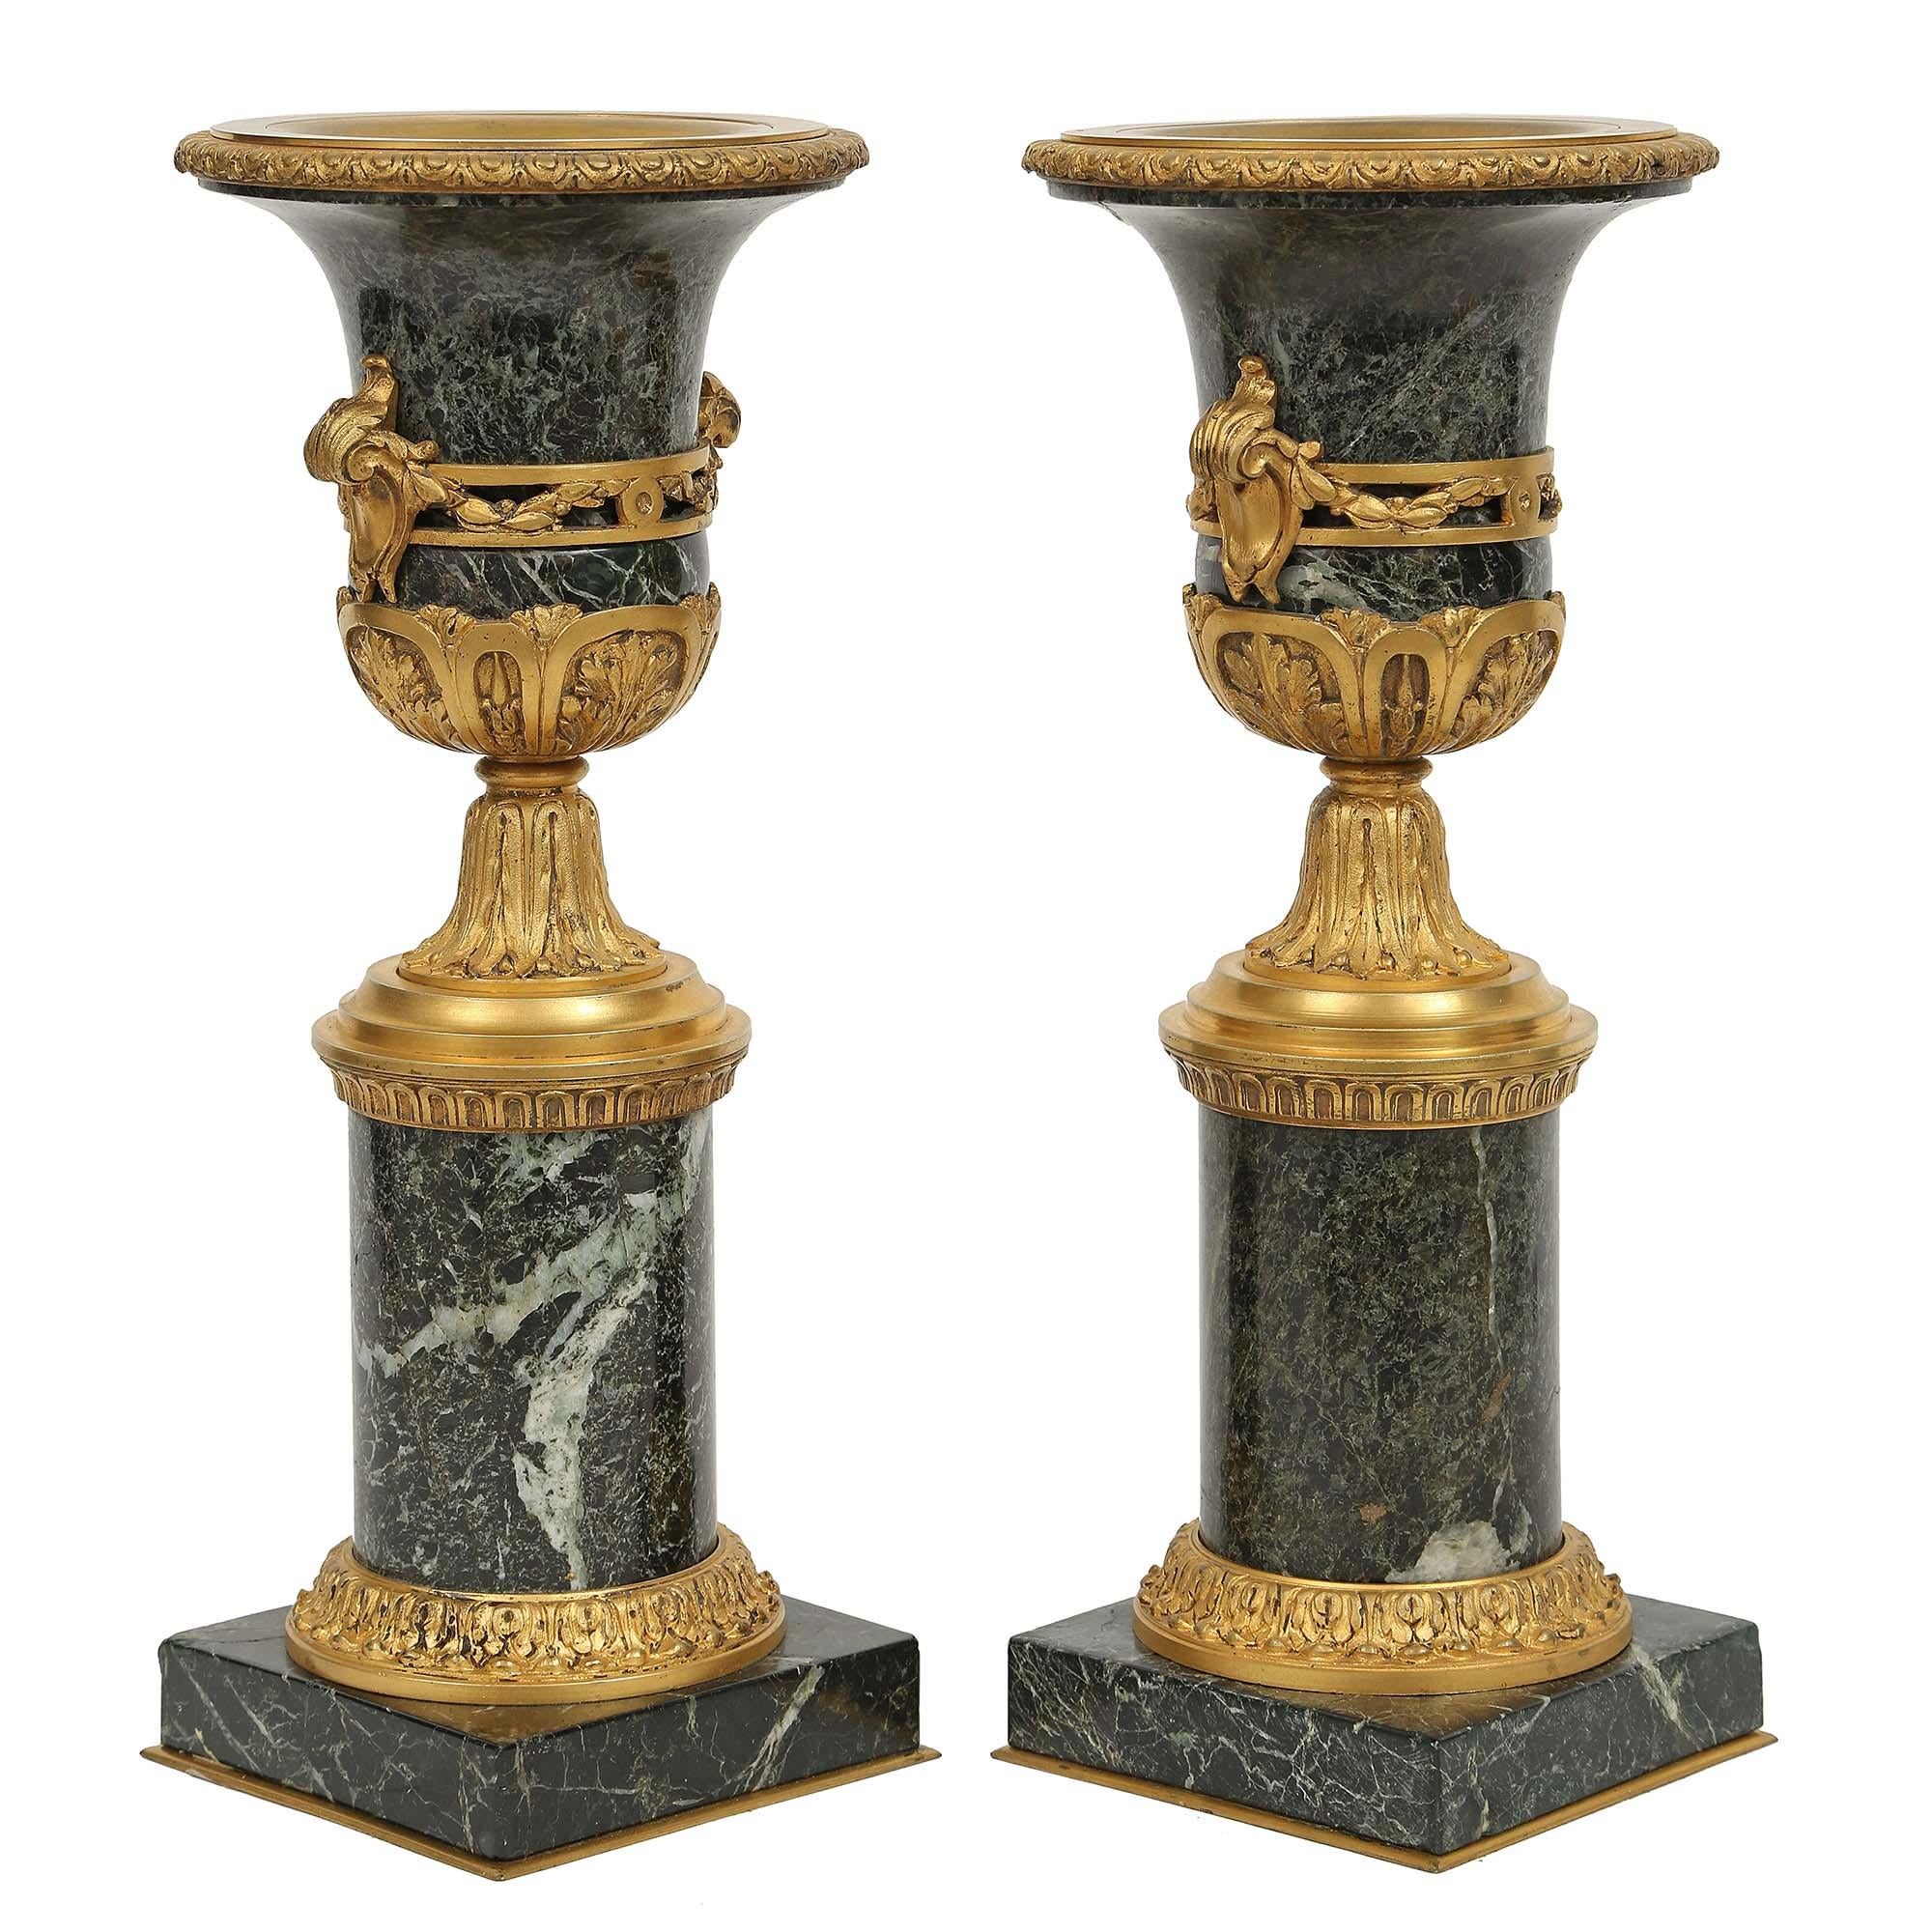 Pair of French Mid-19th Century Louis XVI Style Marble and Ormolu Vases For Sale 1